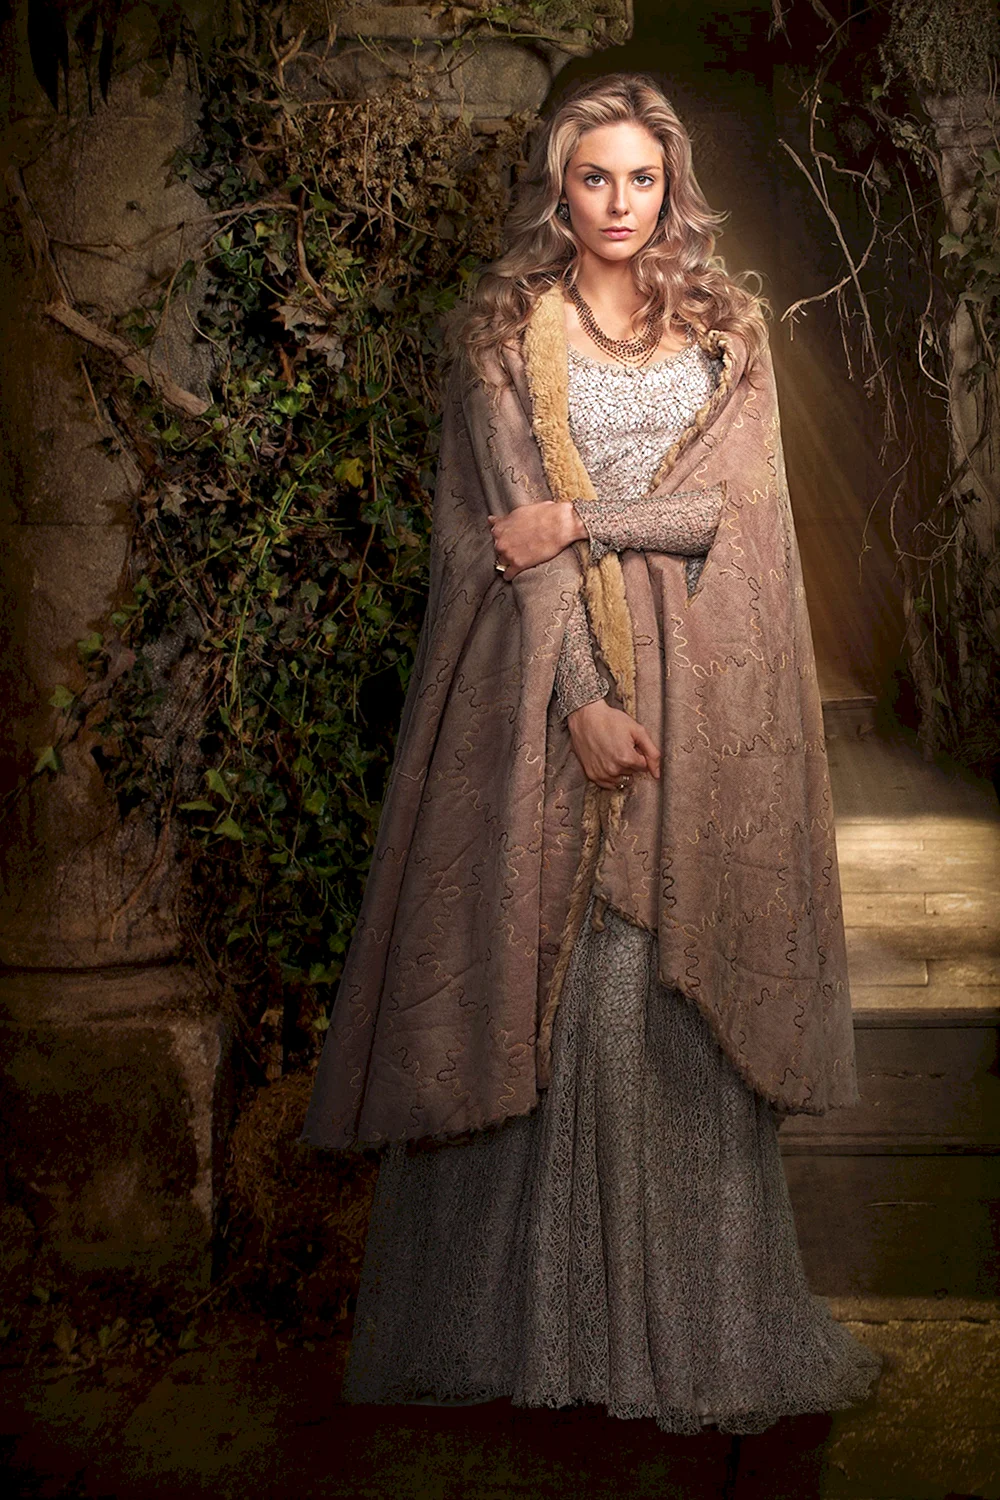 Camelot Guinevere